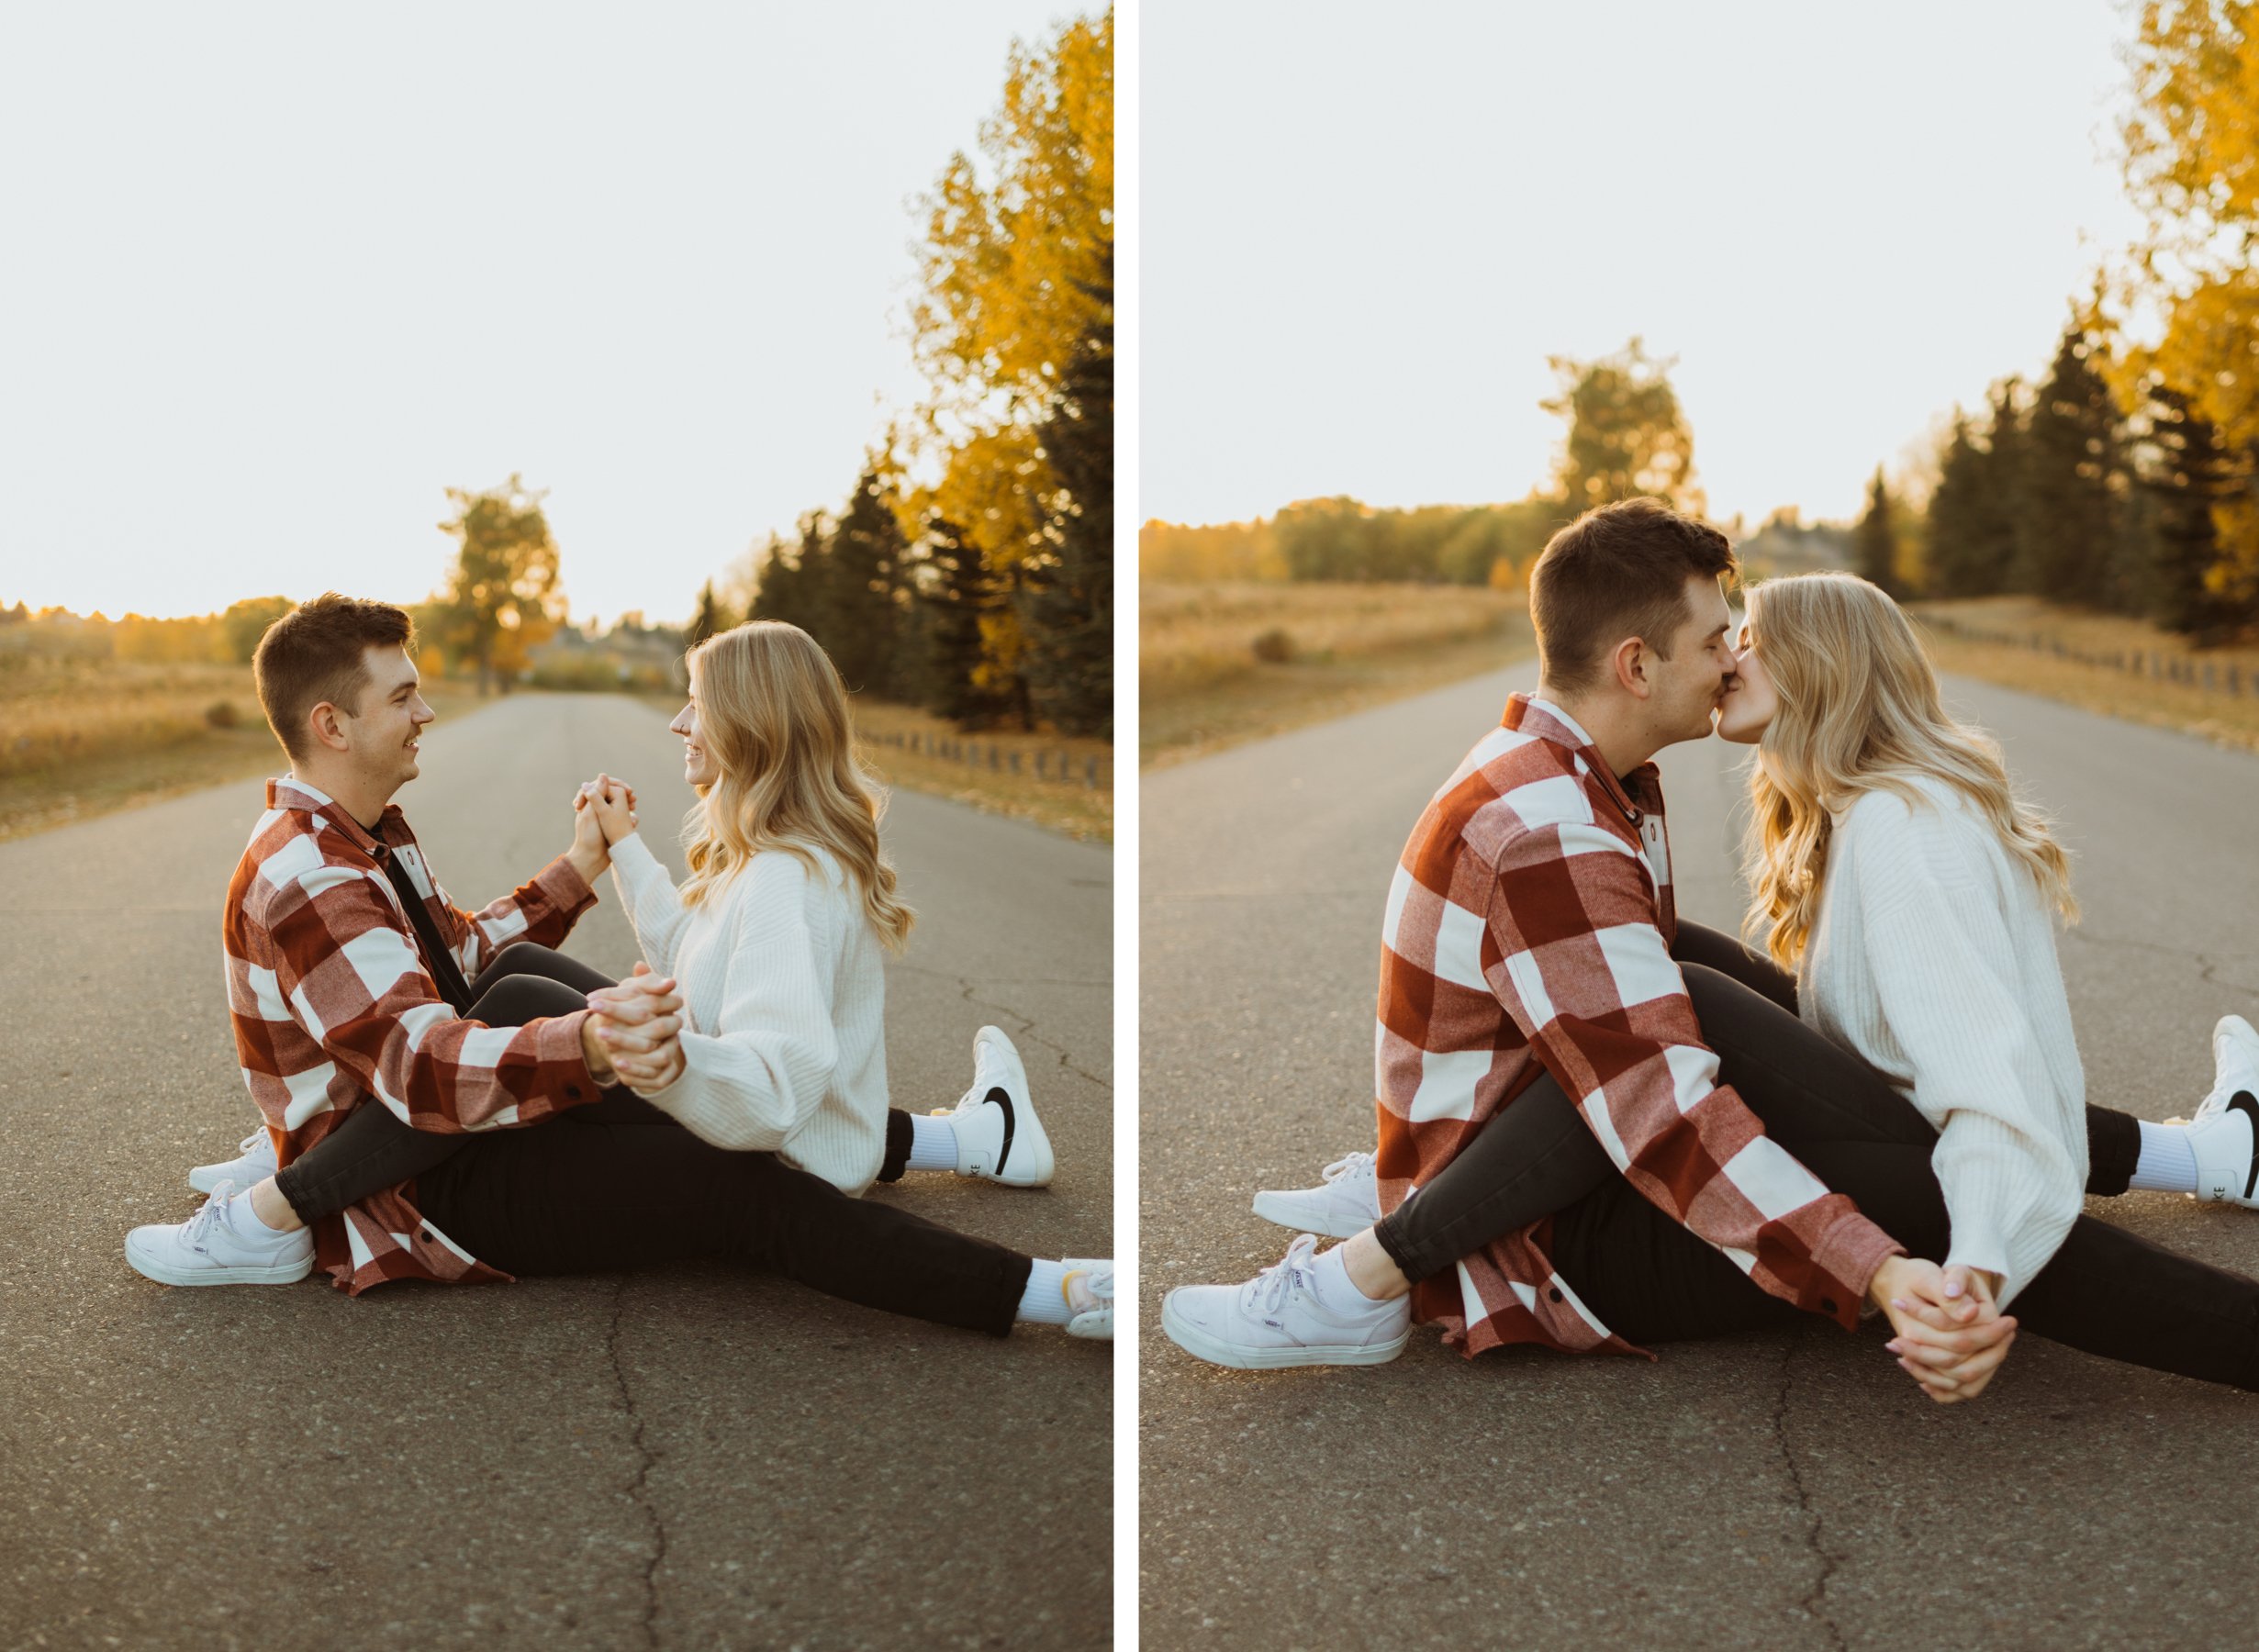 Calgary-wedding-photographer-love-and-be-loved-photography-Matthew-Kyra-Fish-Creek-Park-Fall-Engagement-Session-1.jpg